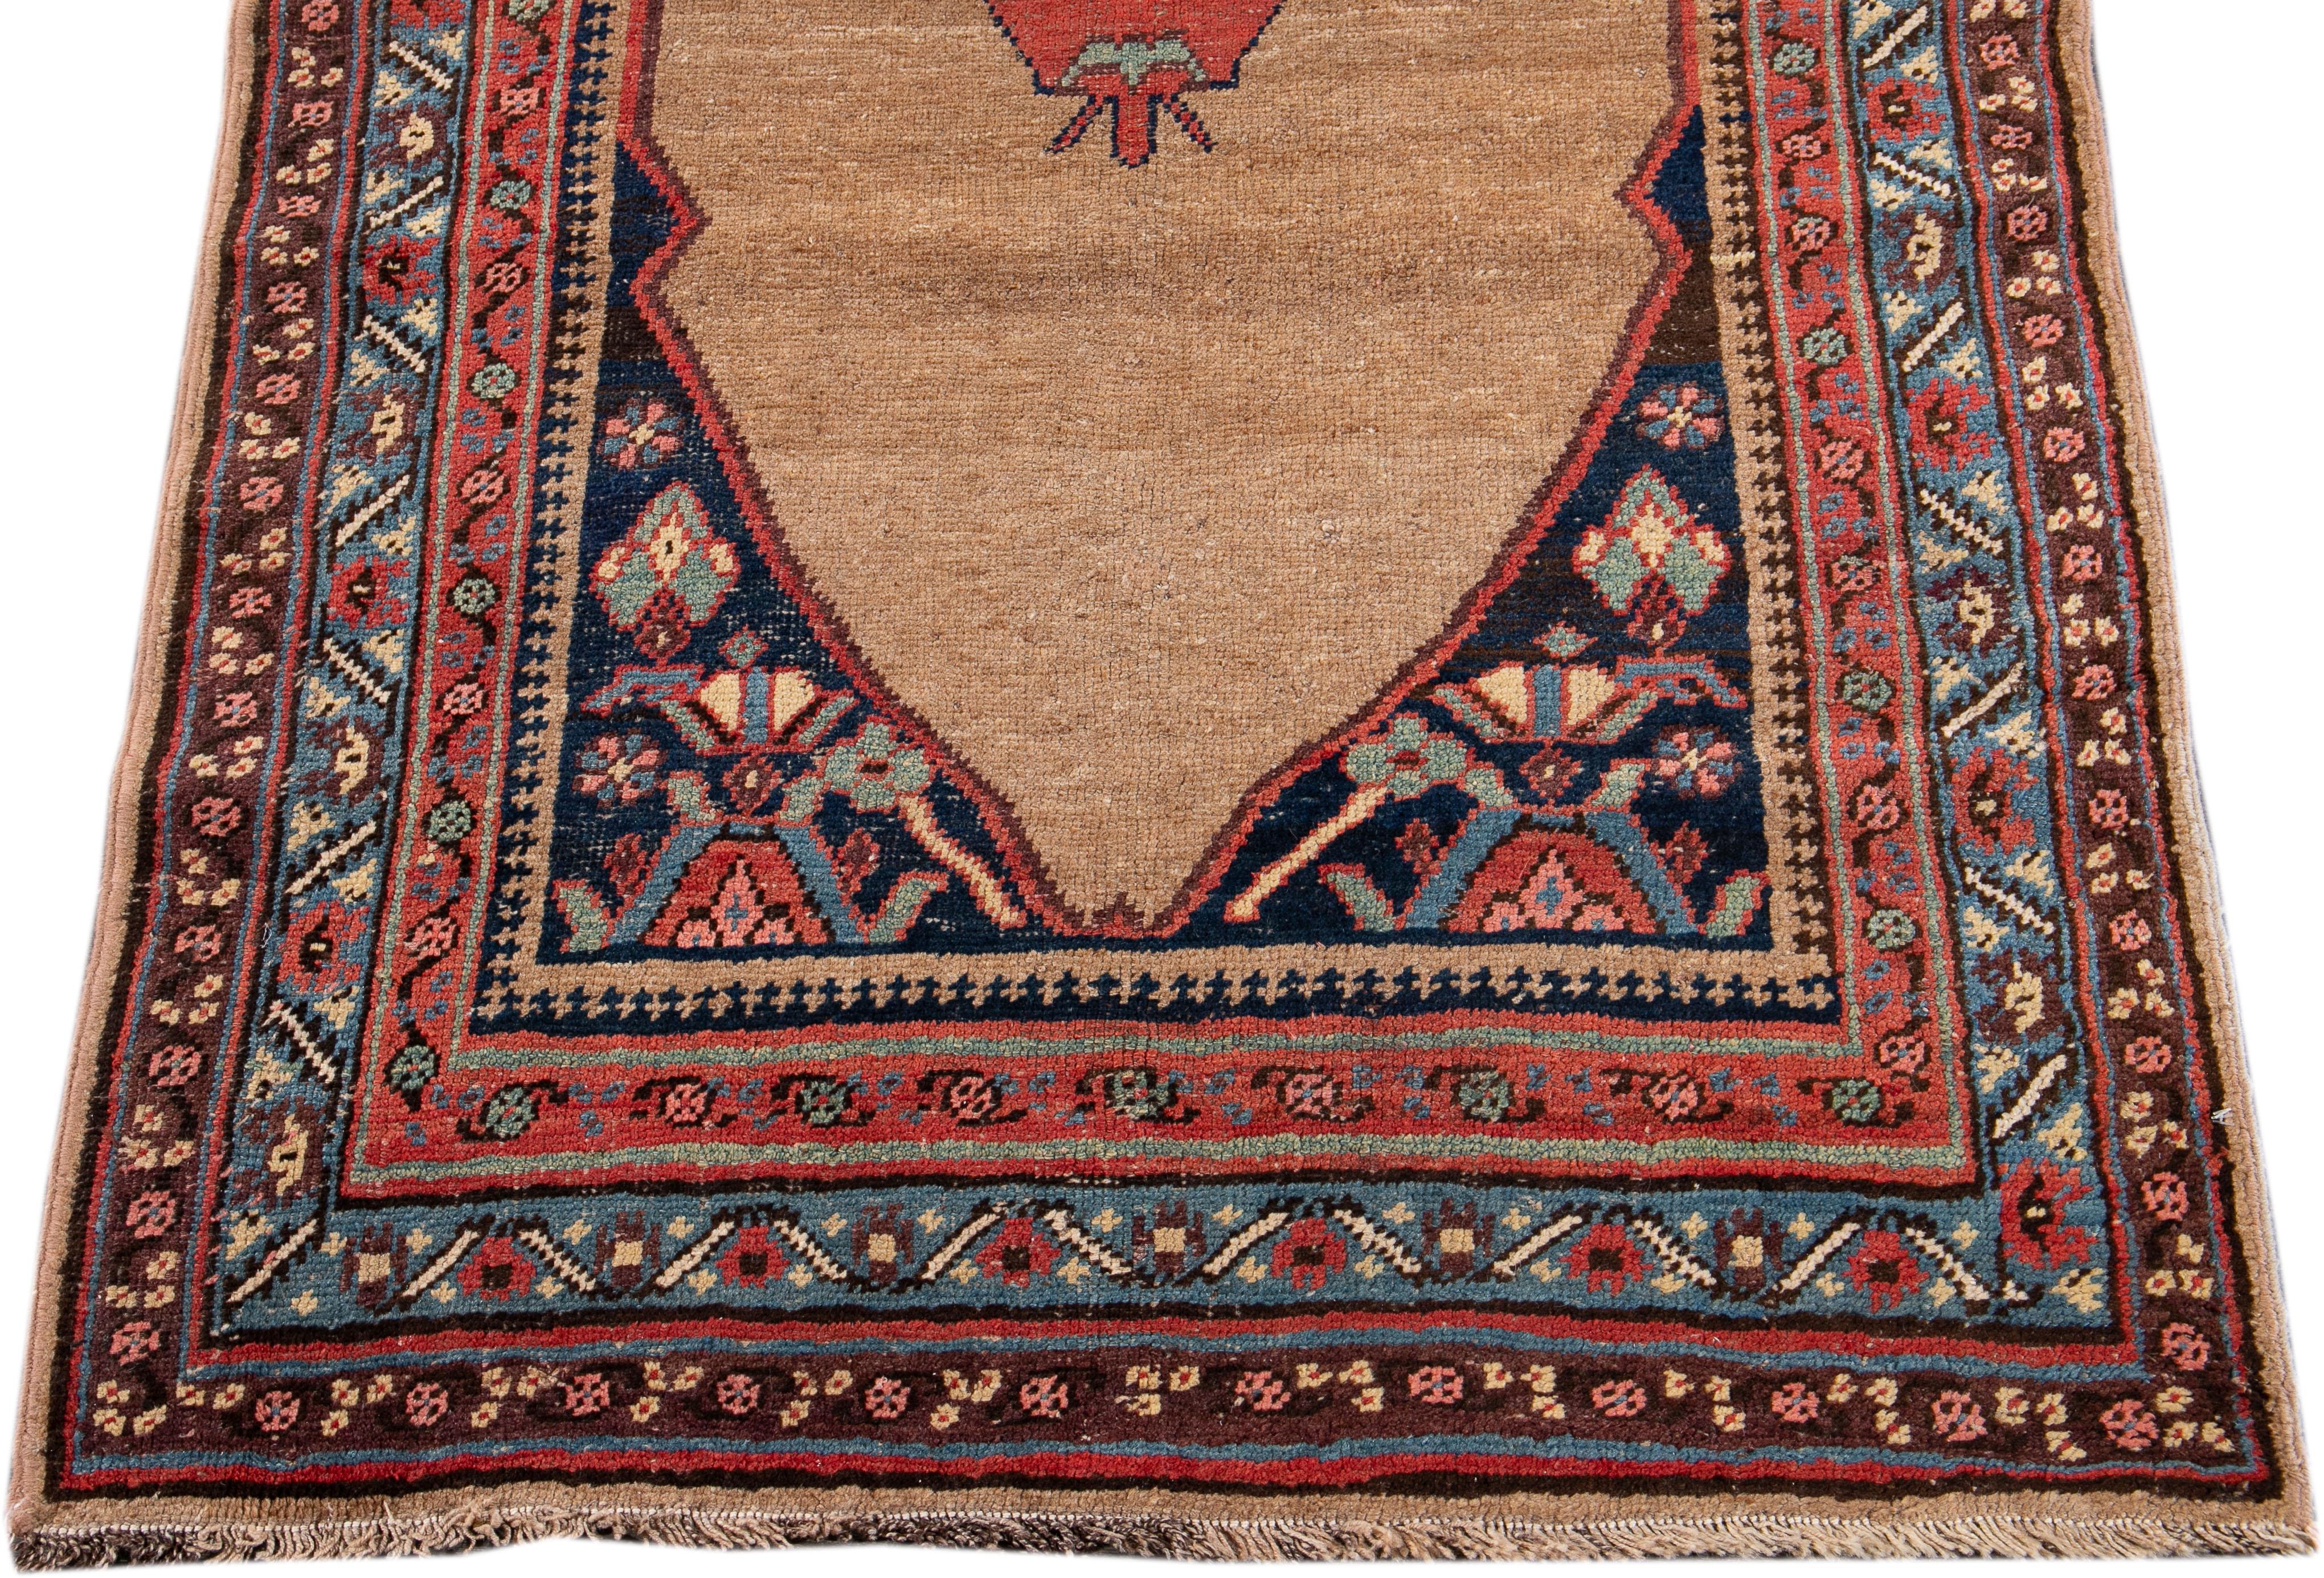 Beautiful antique Bidjar hand-knotted wool runner with a brown color field. This Bidjar rug has a designed frame with blue, pink, and red accents in a gorgeous all-over tribal design.

This rug measures 3'5